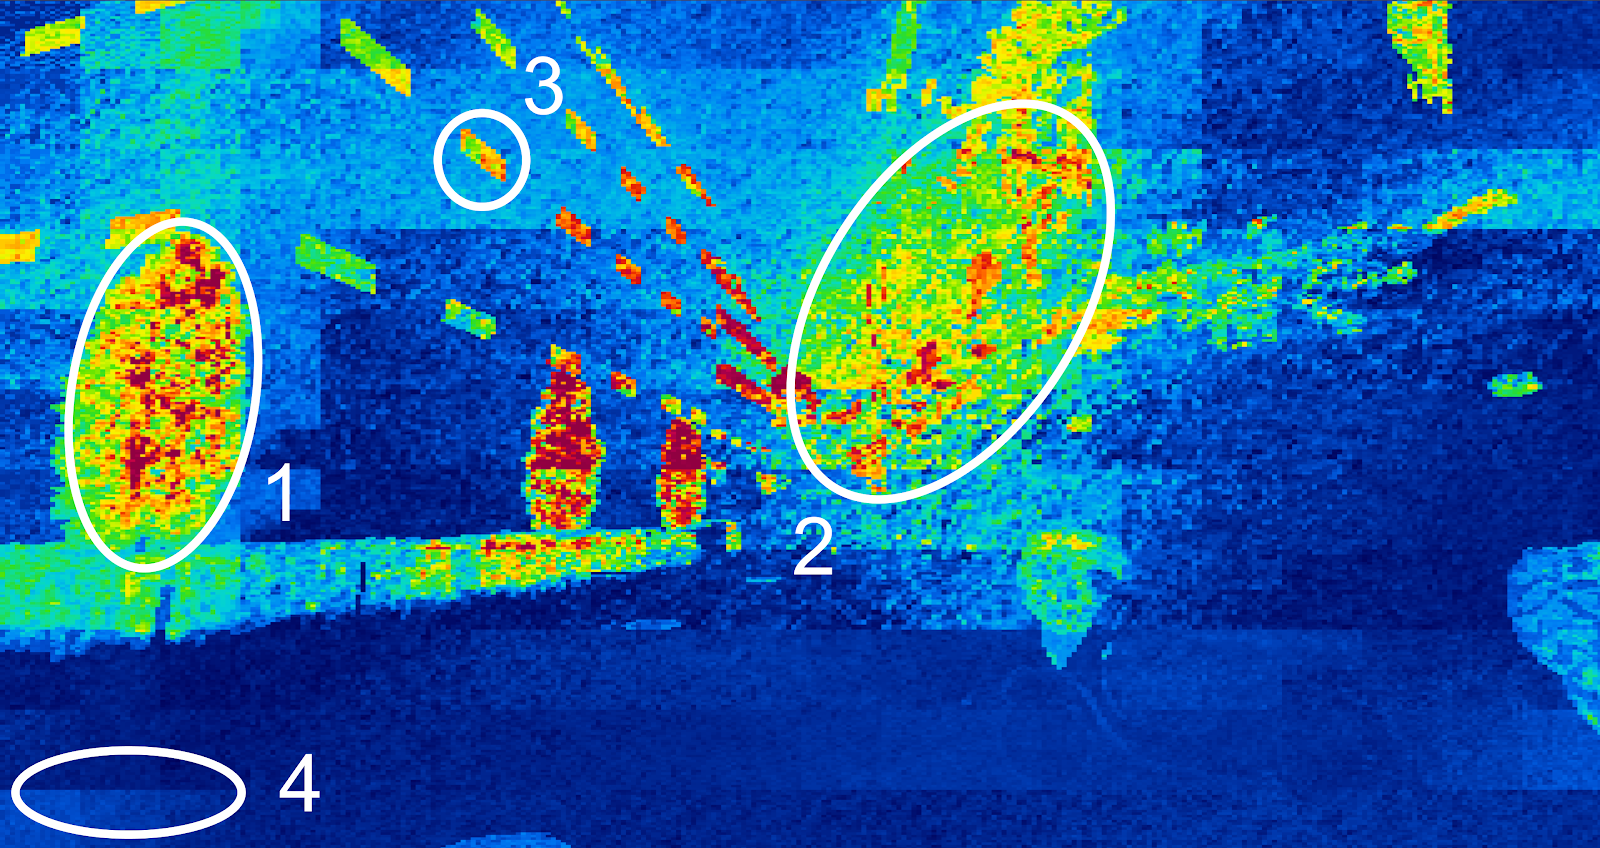 The same heatmap image as above, but now with four regions of the image highlighted. Region 1 has many red pixels followed by yellow pixels with very few blue pixels. Region 2 has mostly yellow pixels and some red pixels. Region 3 is mostly blue pixels with a small condensed block of yellow and red pixels. Region 4 is mostly blue pixels with no red or yellow pixels and noticeable rectangular blocks of pixels.